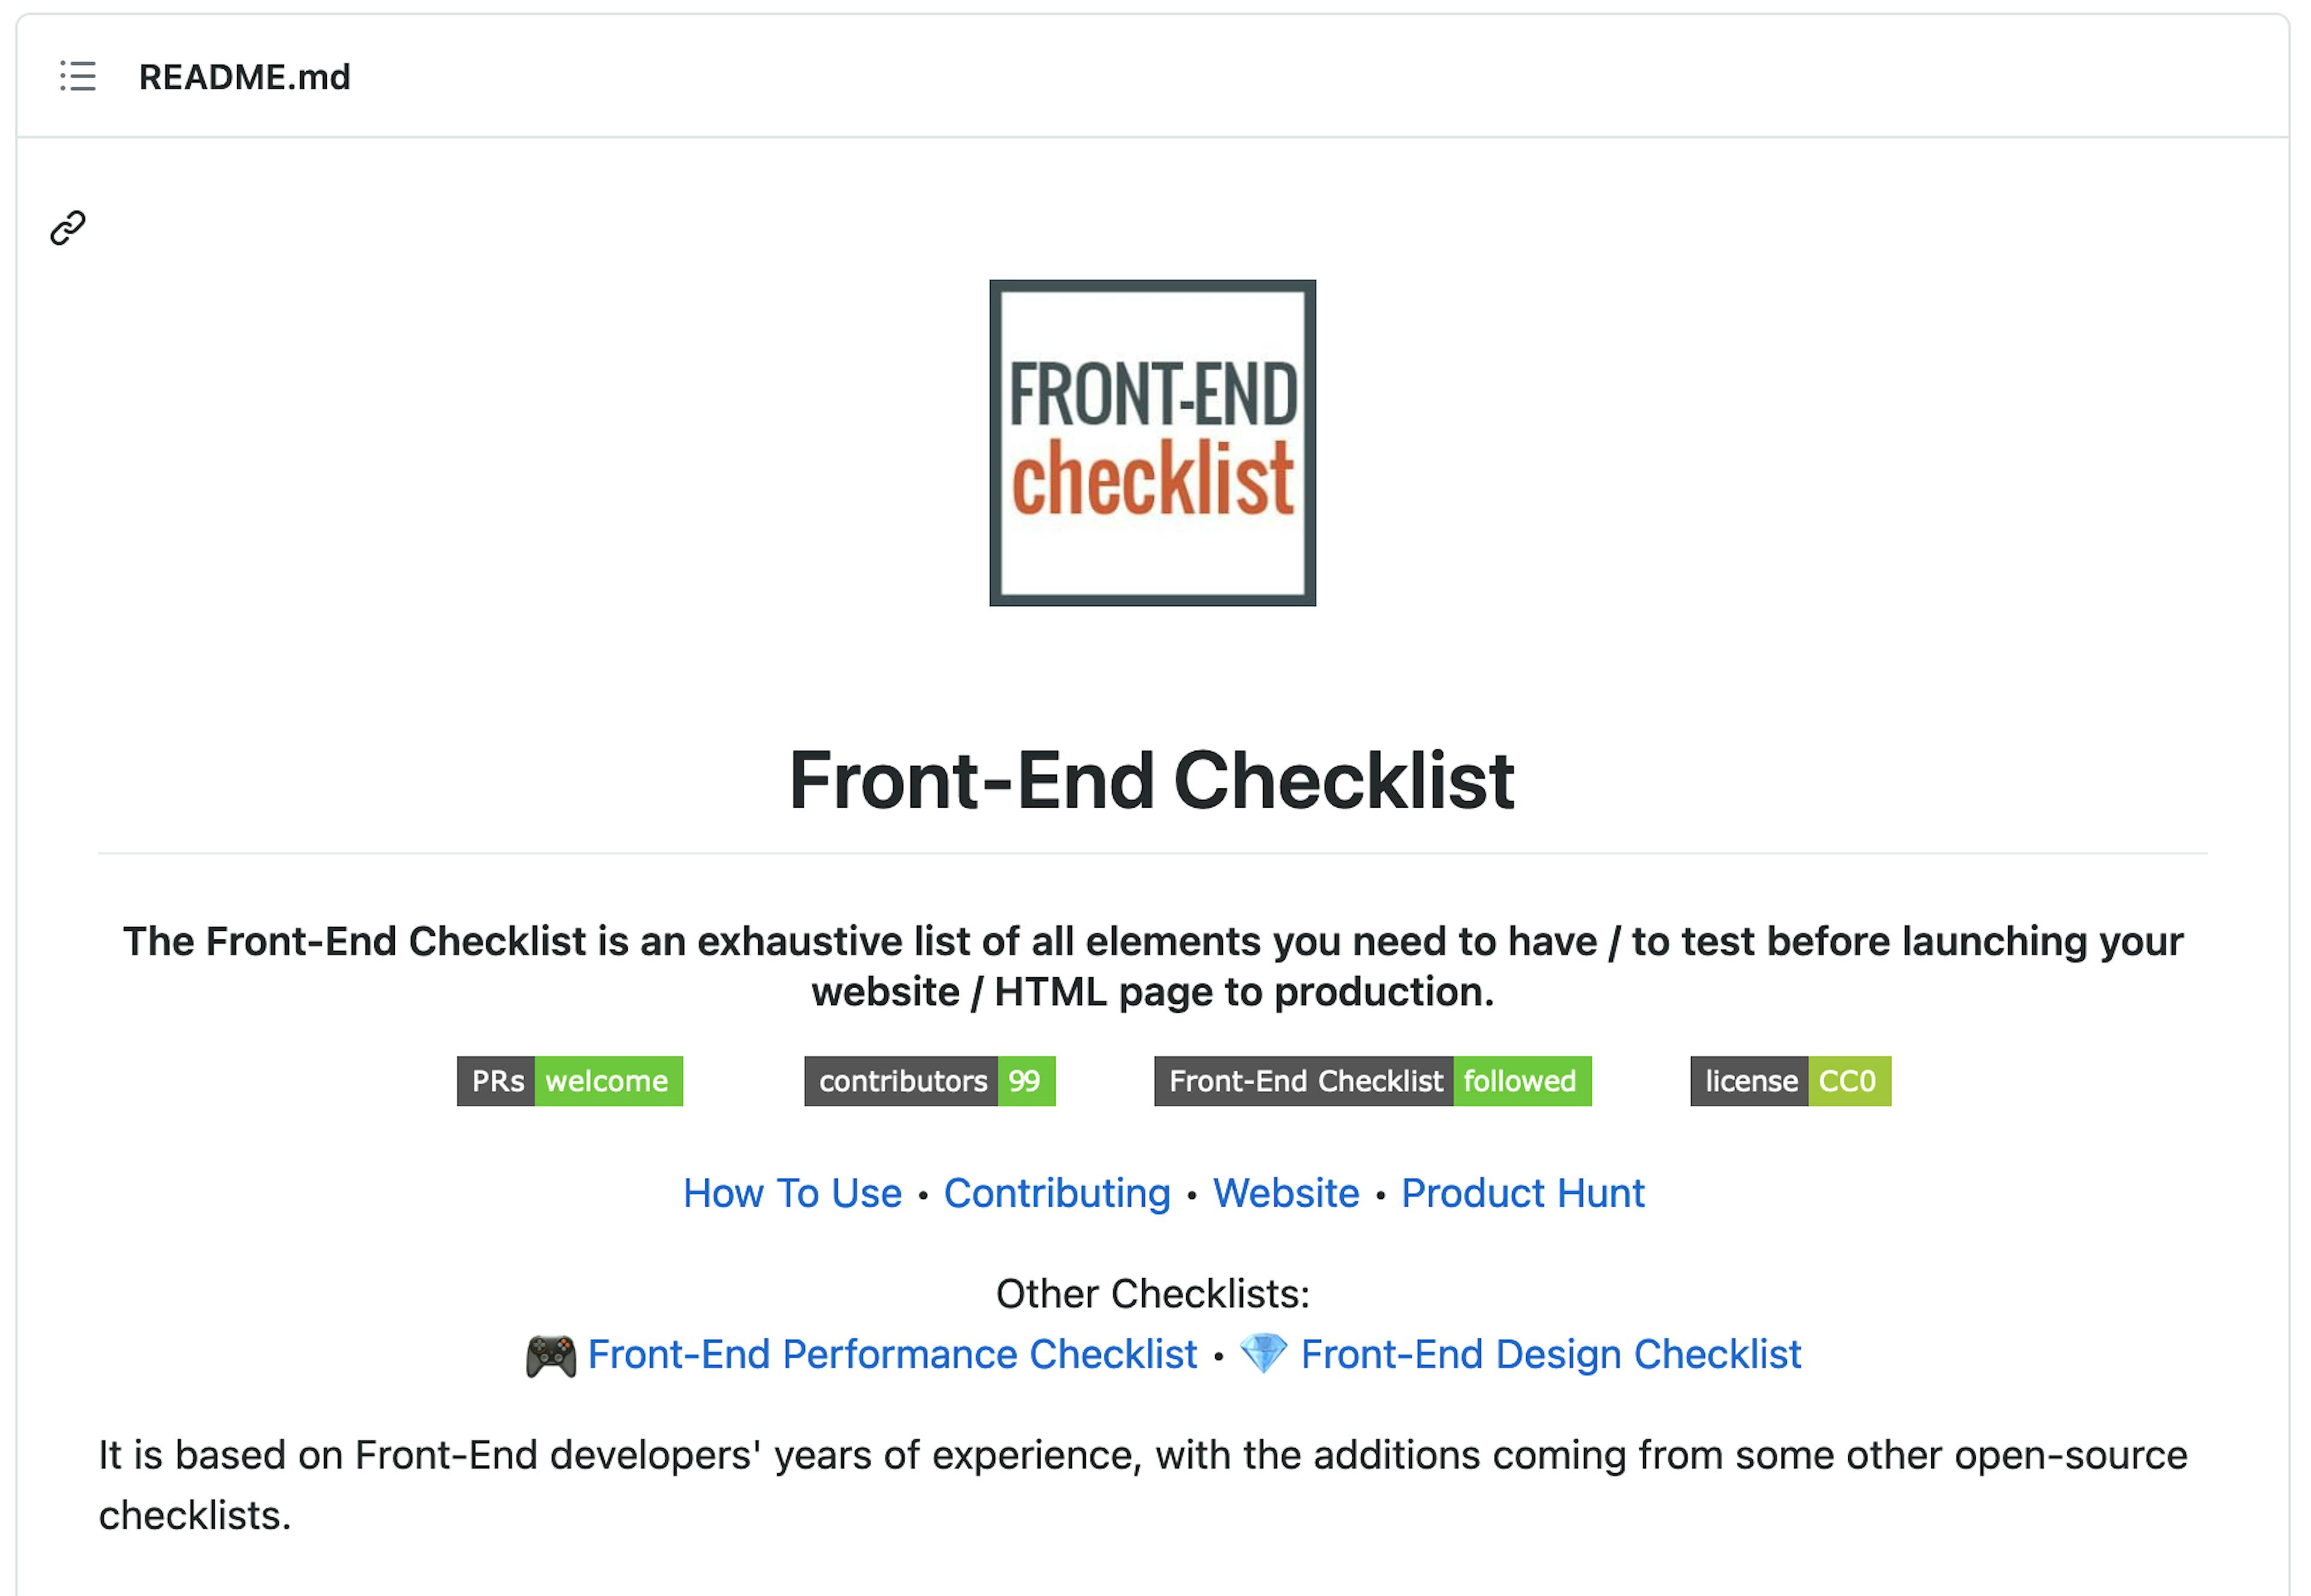 Front-End-Checklist